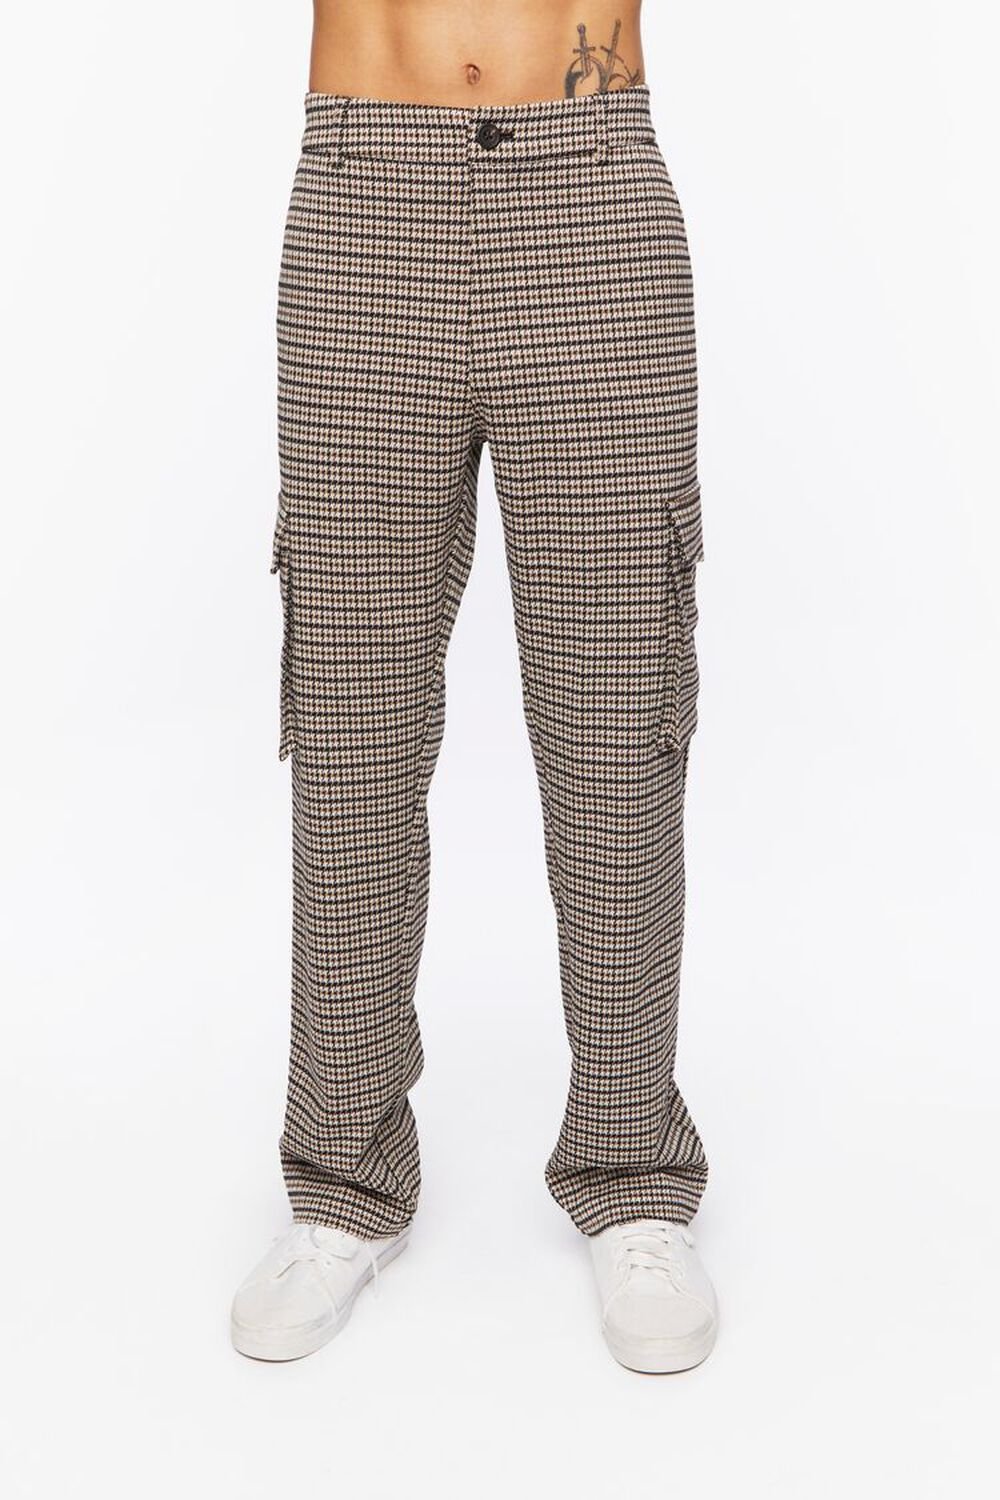 BROWN/MULTI Houndstooth Straight-Leg Trousers, image 2